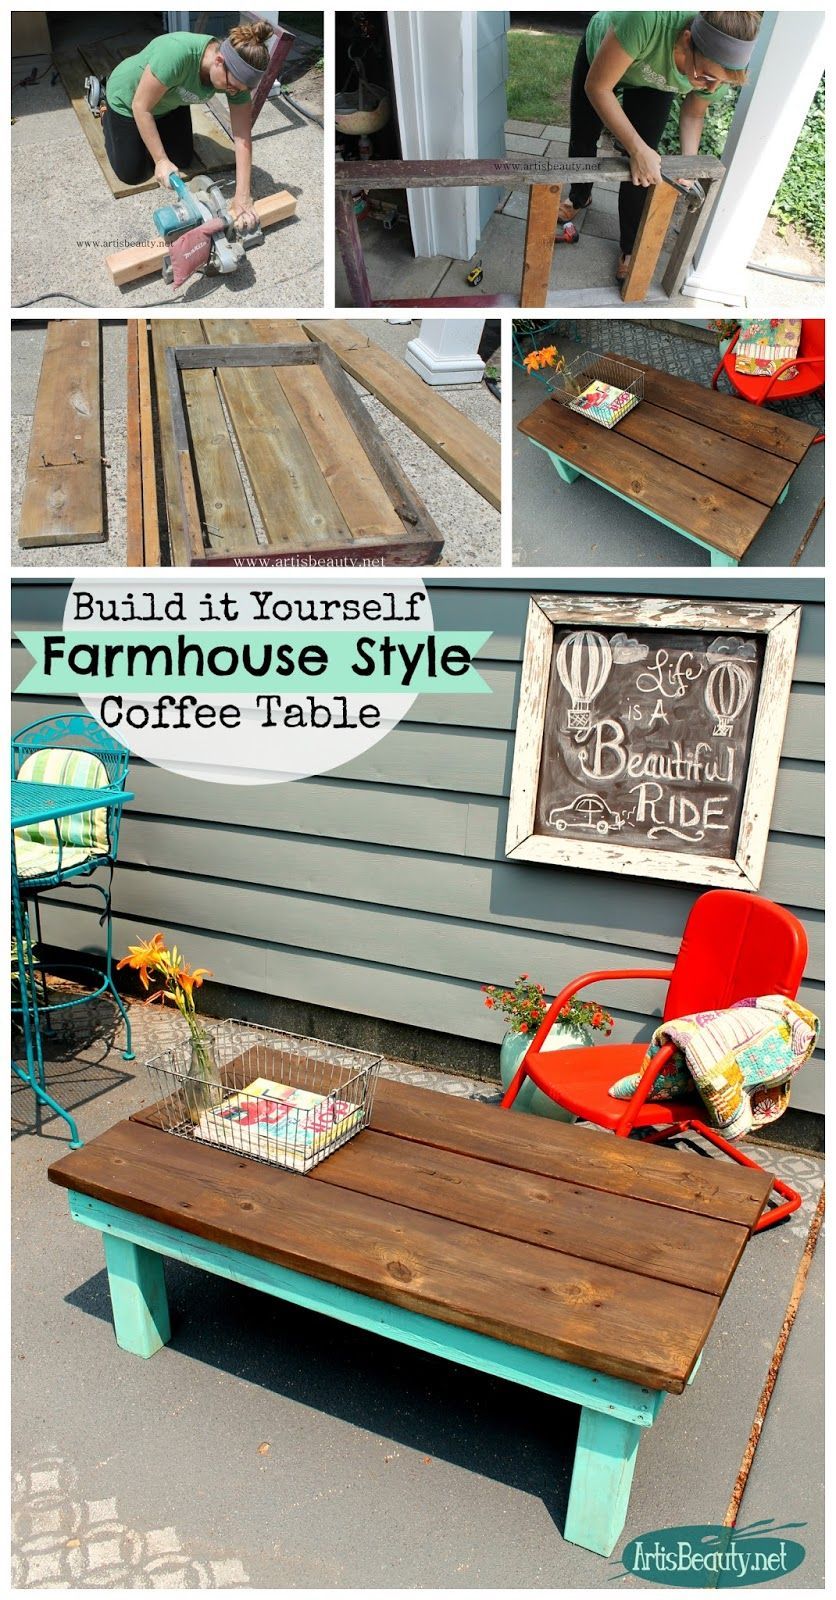 ART IS BEAUTY: DIY build it yourself Vintage Farmhouse Style Coffee Table from Rescued Lumber.